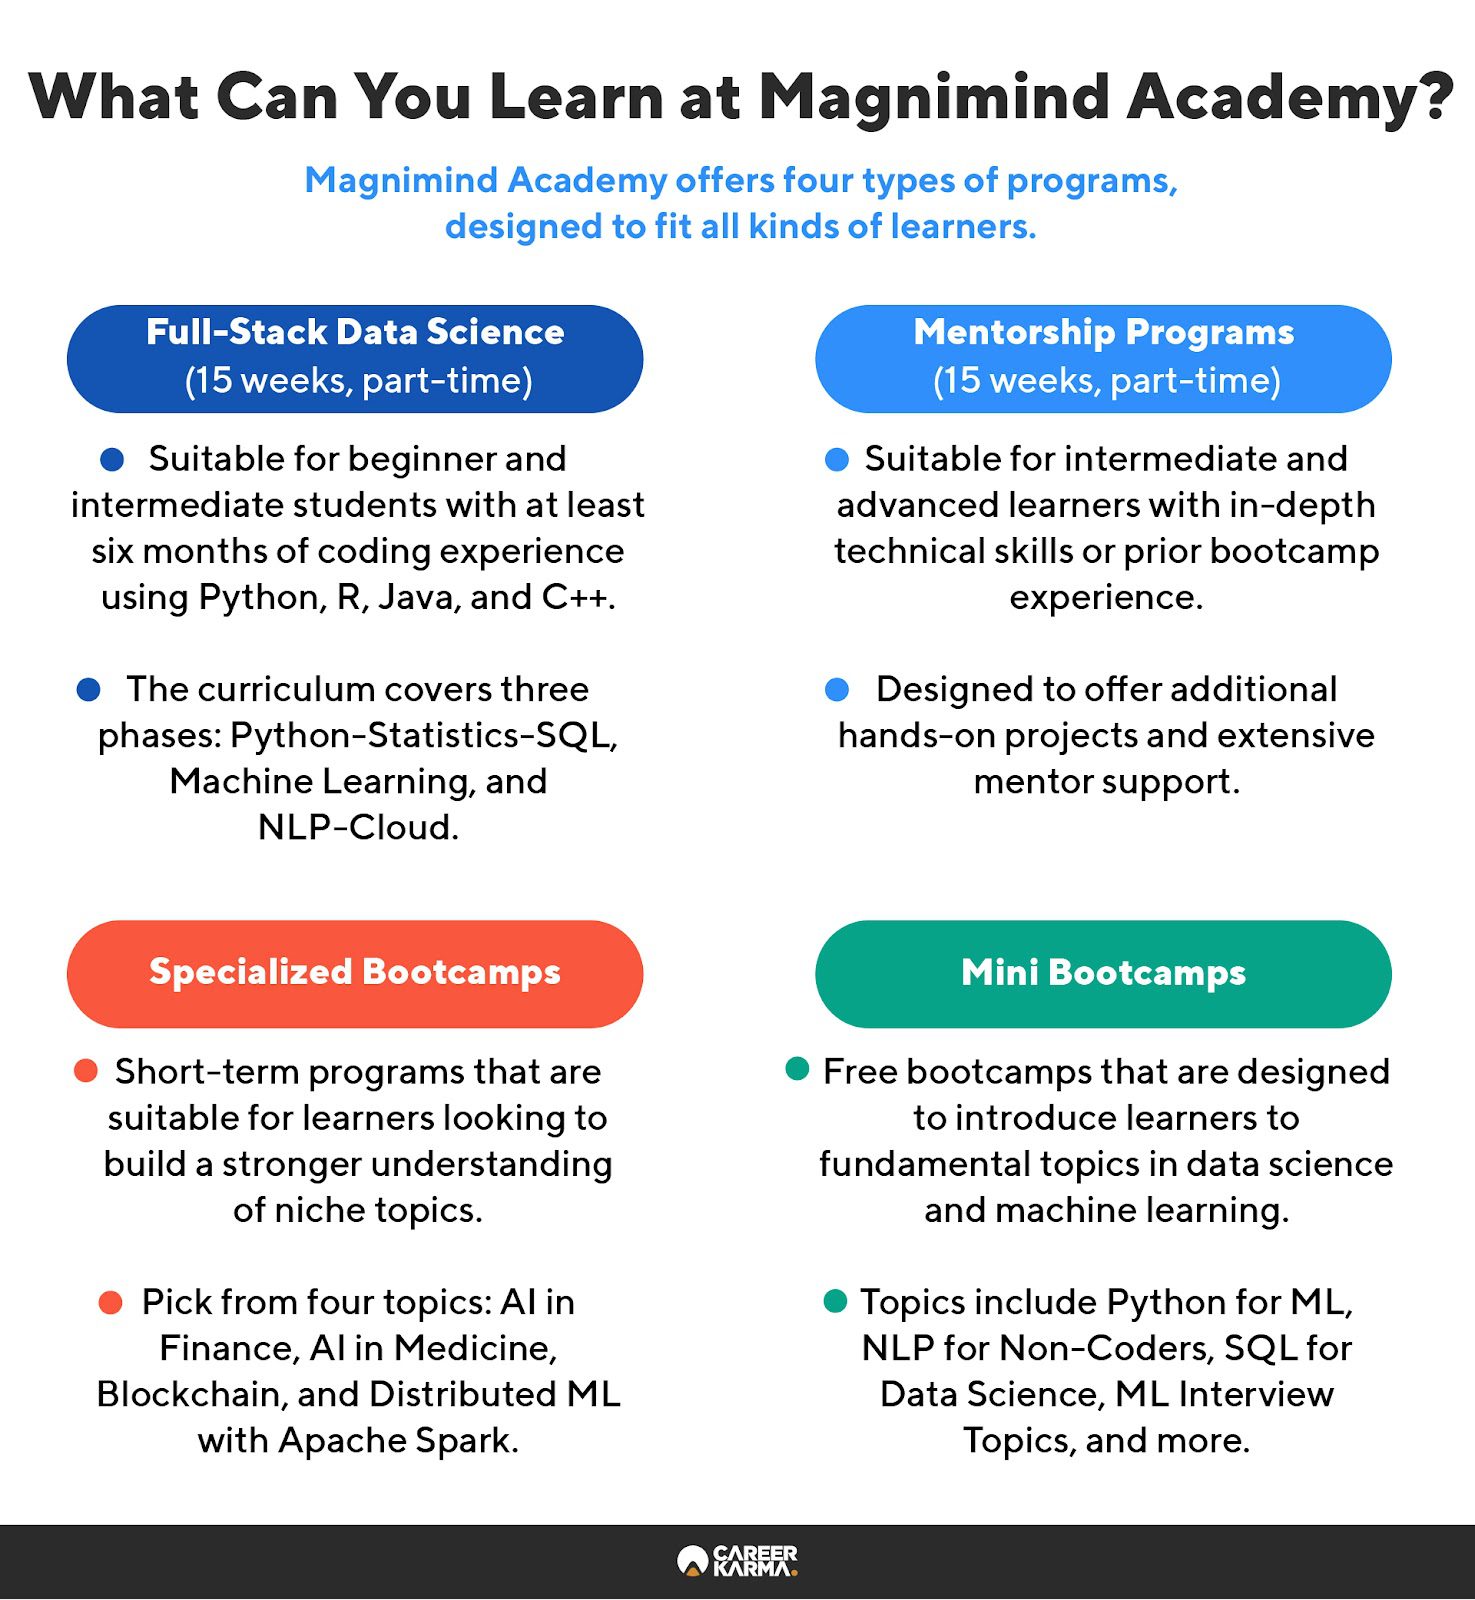 An infographic highlighting the four kinds of programs at Magnimind Academy